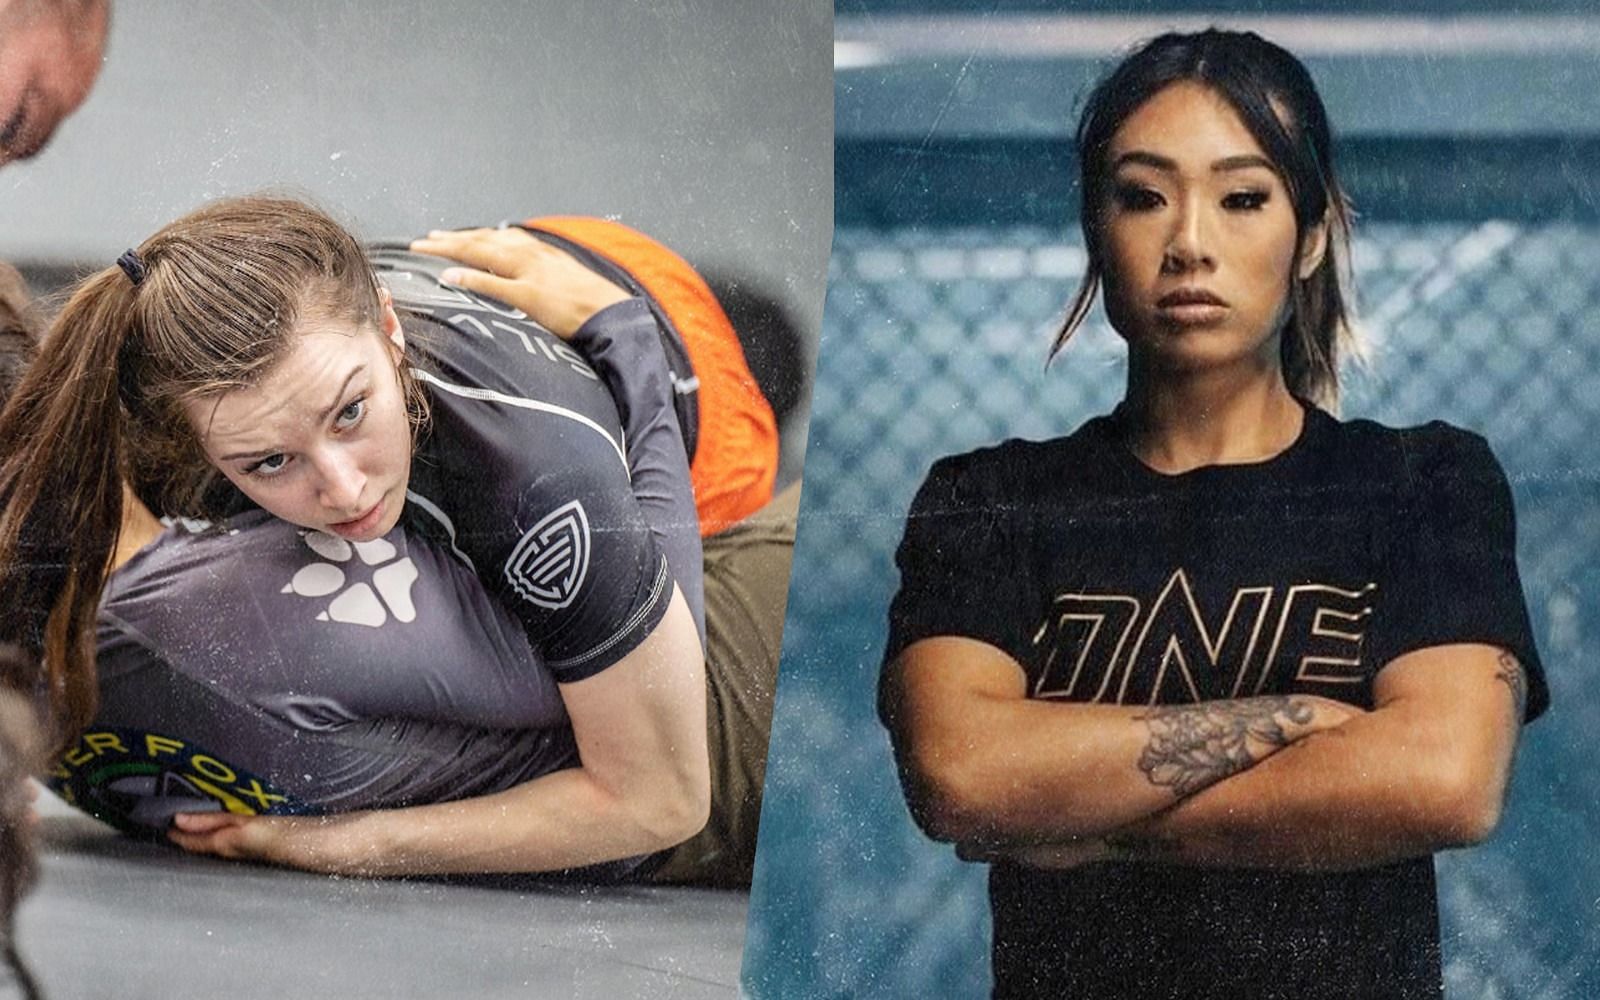 Danielle Kelly (left) and Angela Lee (right) [Photo Credits: ONE Championship]